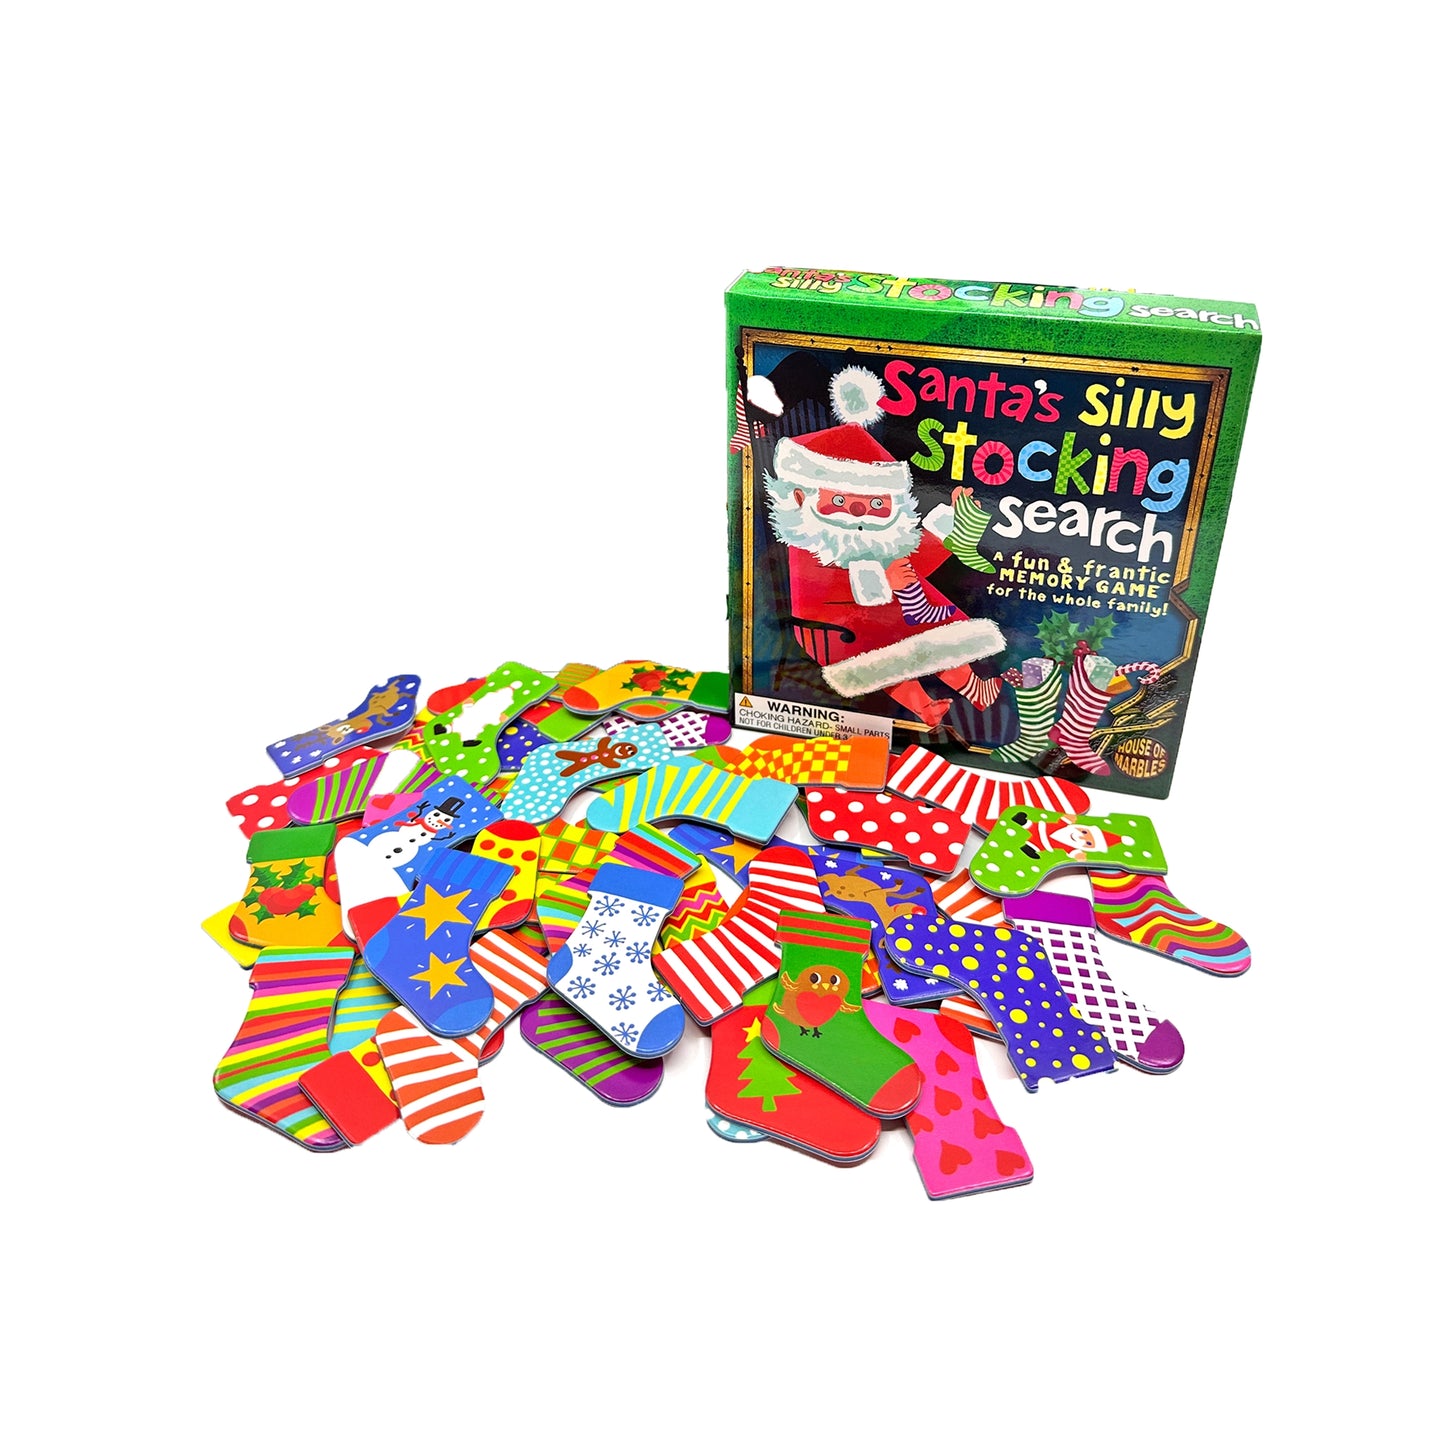 Santa’s Silly Stocking Search Game